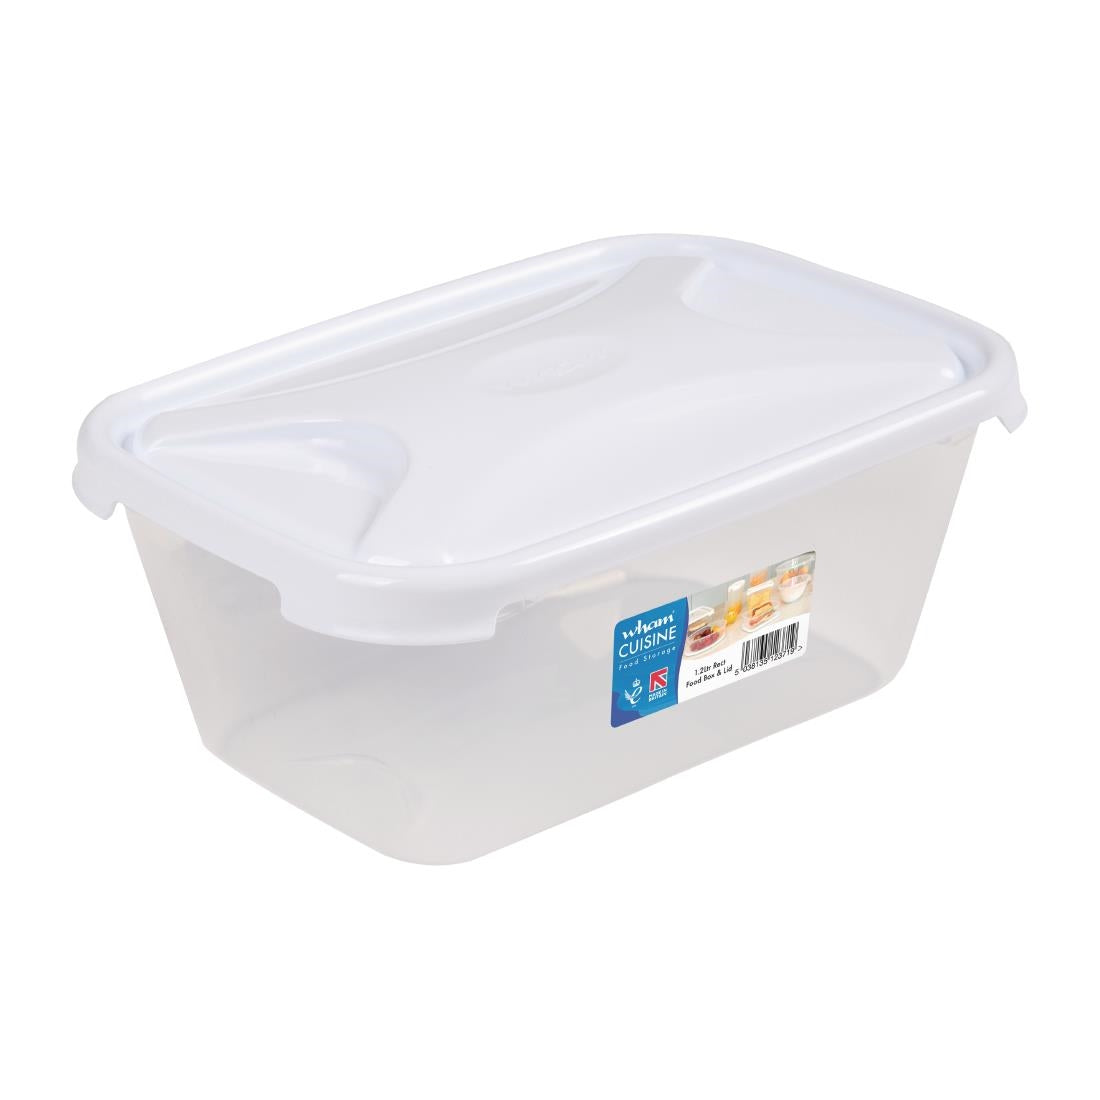 FS452 Wham Cuisine Polypropylene Food Storage Lunch Box Container 1.2ltr JD Catering Equipment Solutions Ltd